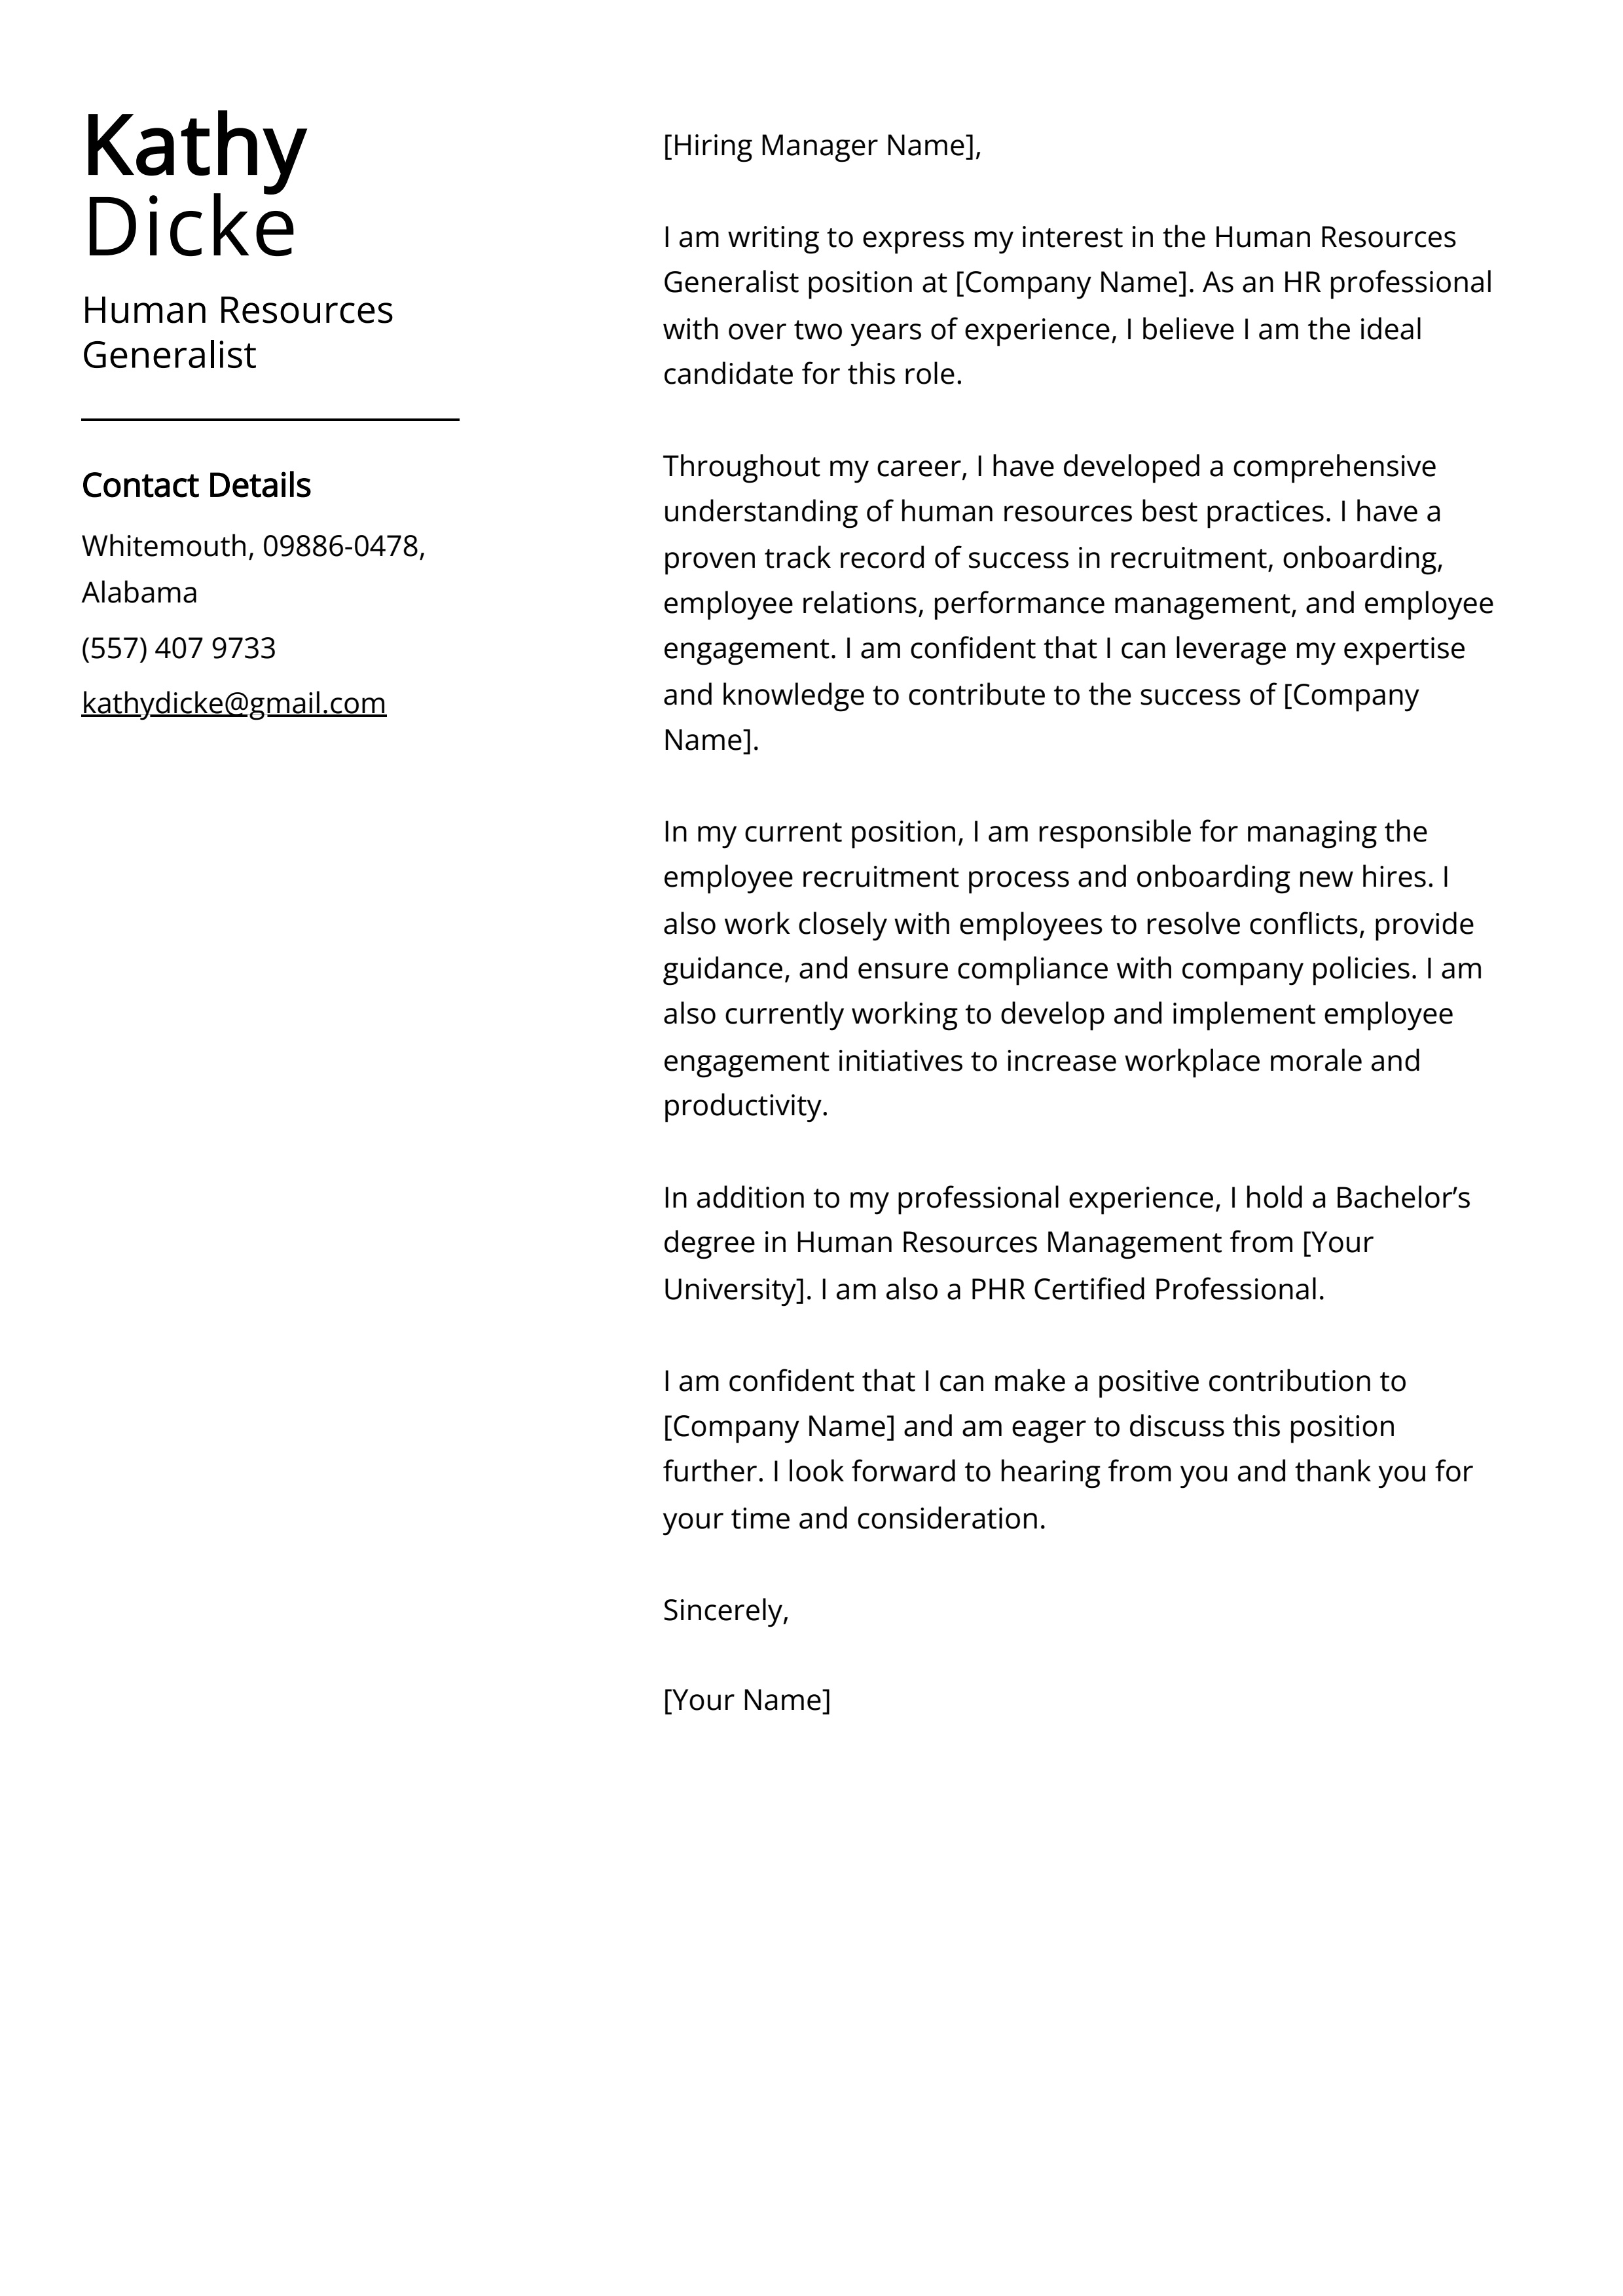 Human Resources Generalist Cover Letter Example